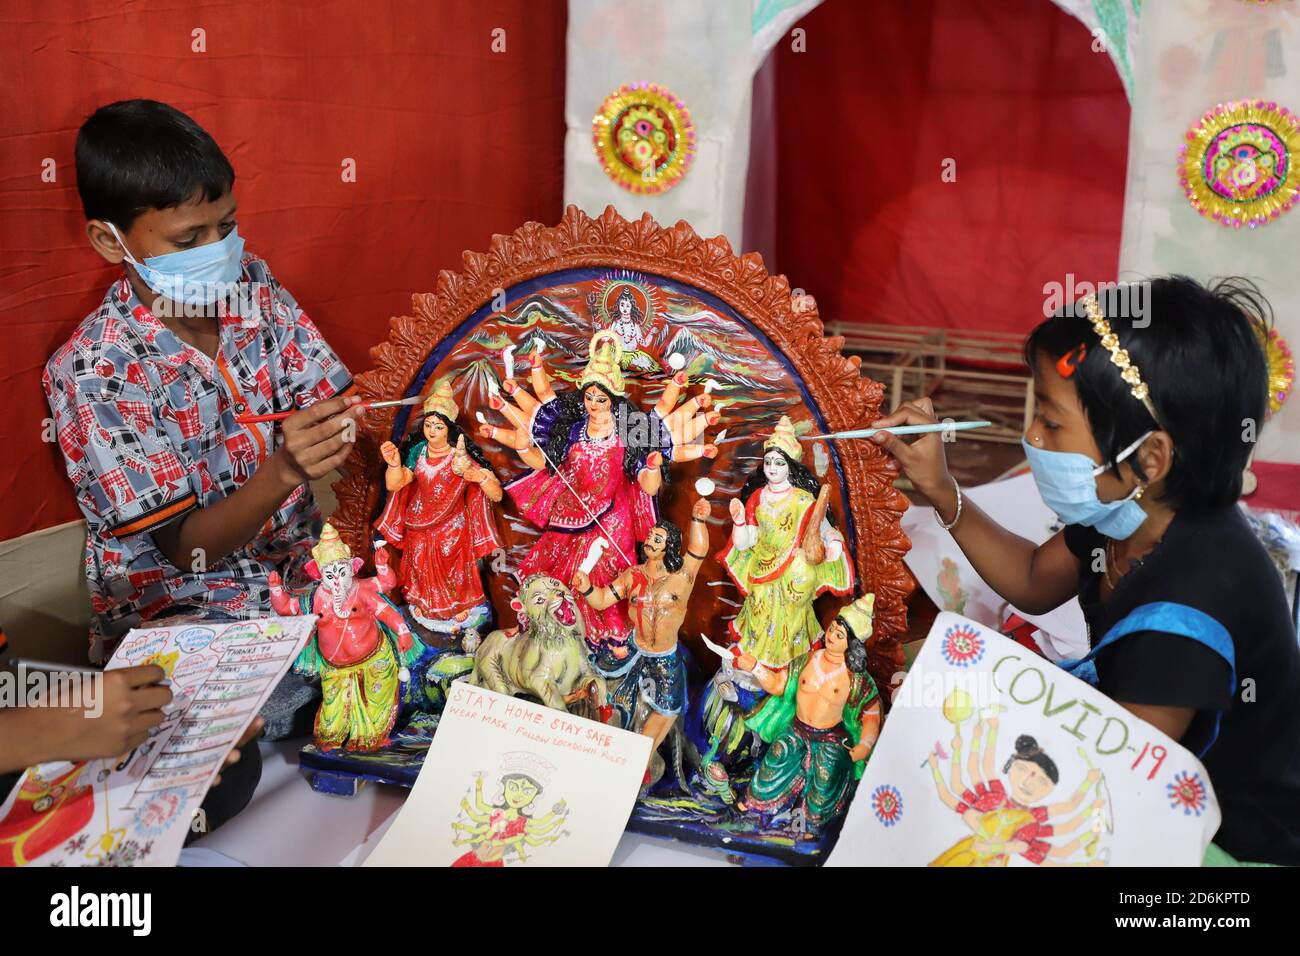 Children from Sundarbans wearing face masks paint and give finishing touches to a 1.5 feet tall clay idol of Goddess Durga prior to the Durga puja festival amidst Covid-19 pandemic. Stock Photo